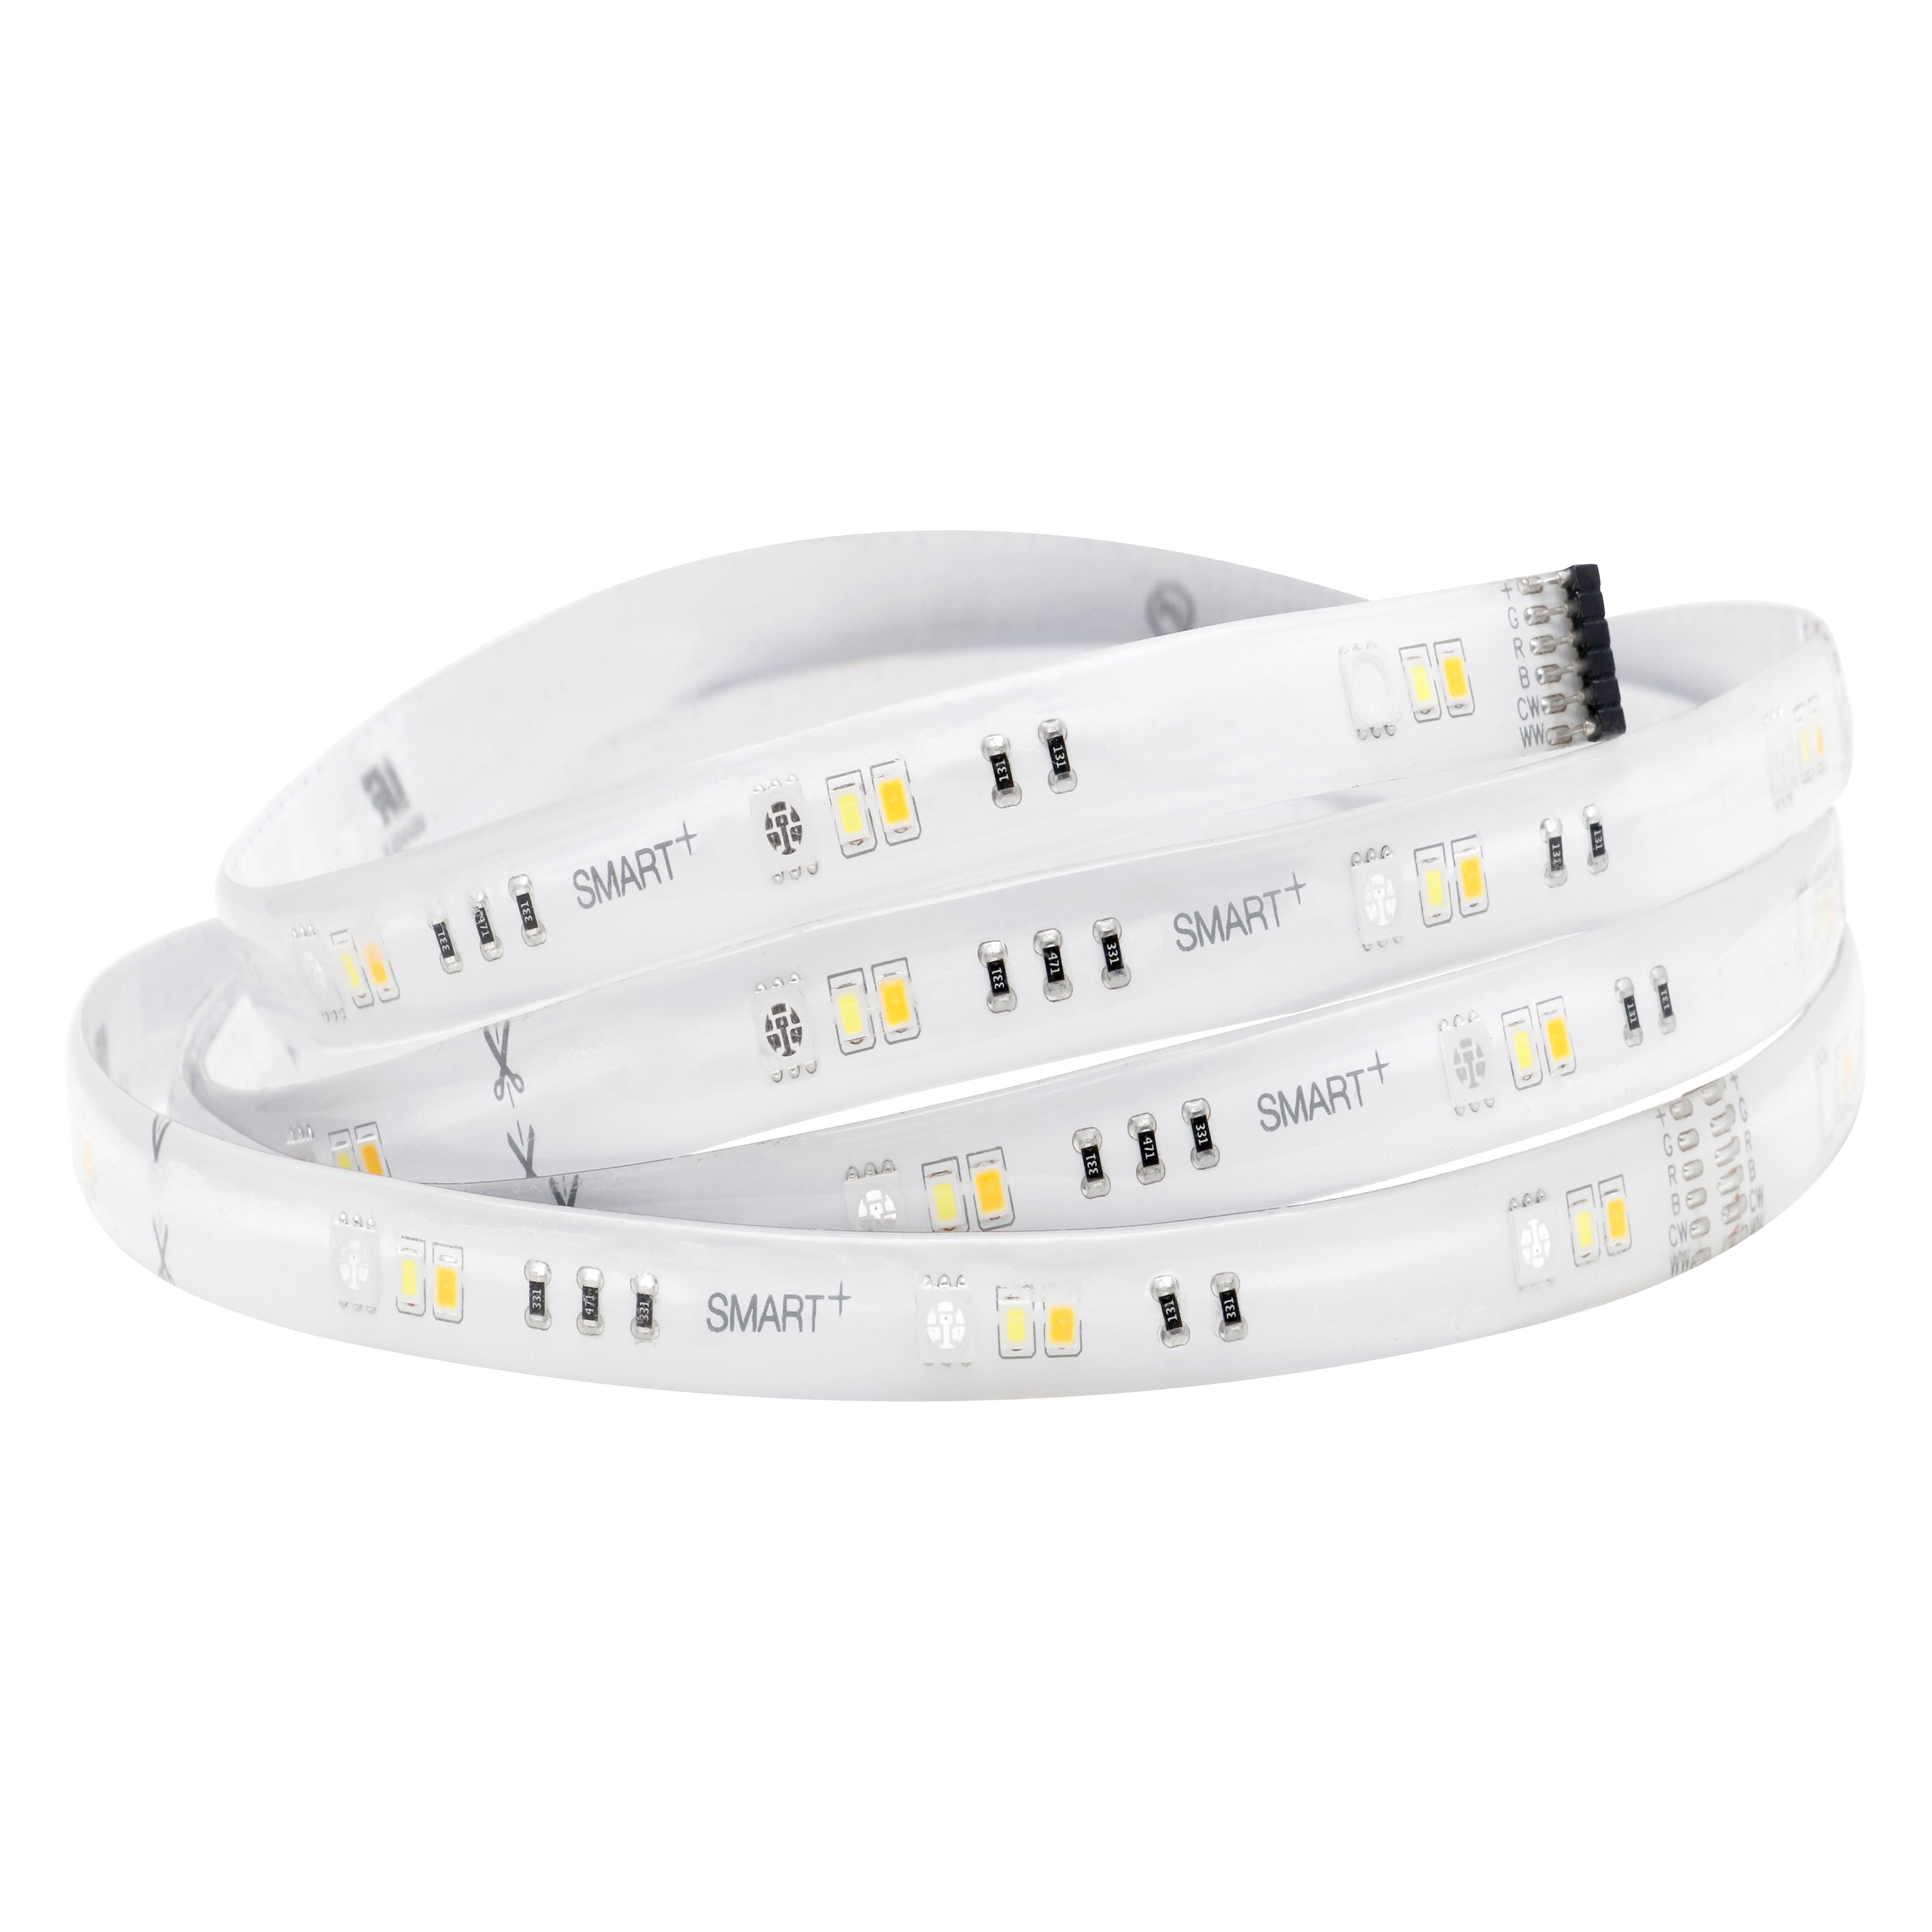 SYLVANIA Changing LED Strip Light in the Strip department Lowes.com